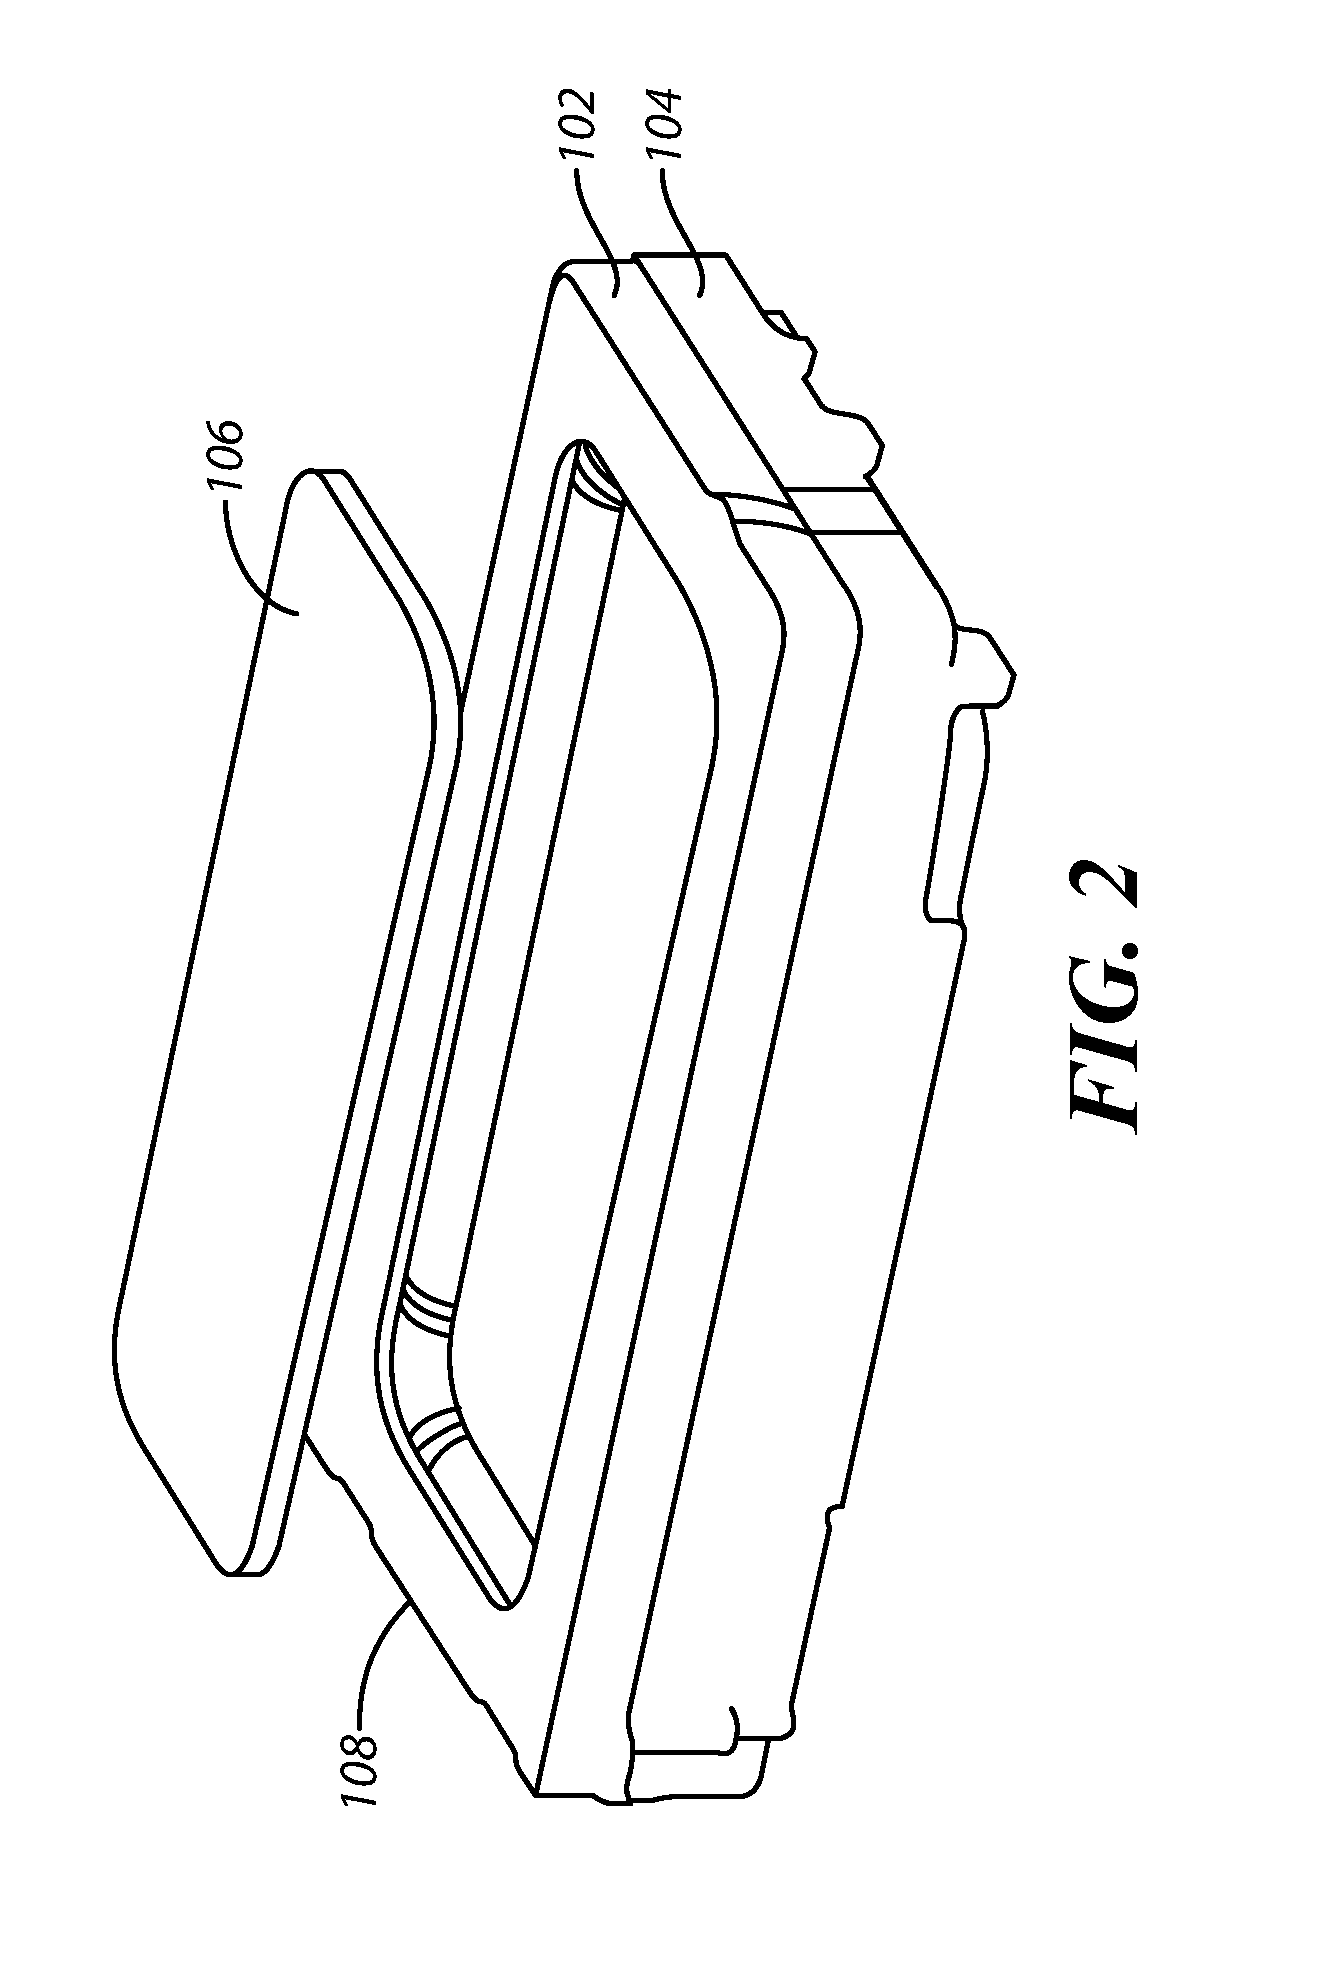 Speaker with embedded piezoelectric transducer